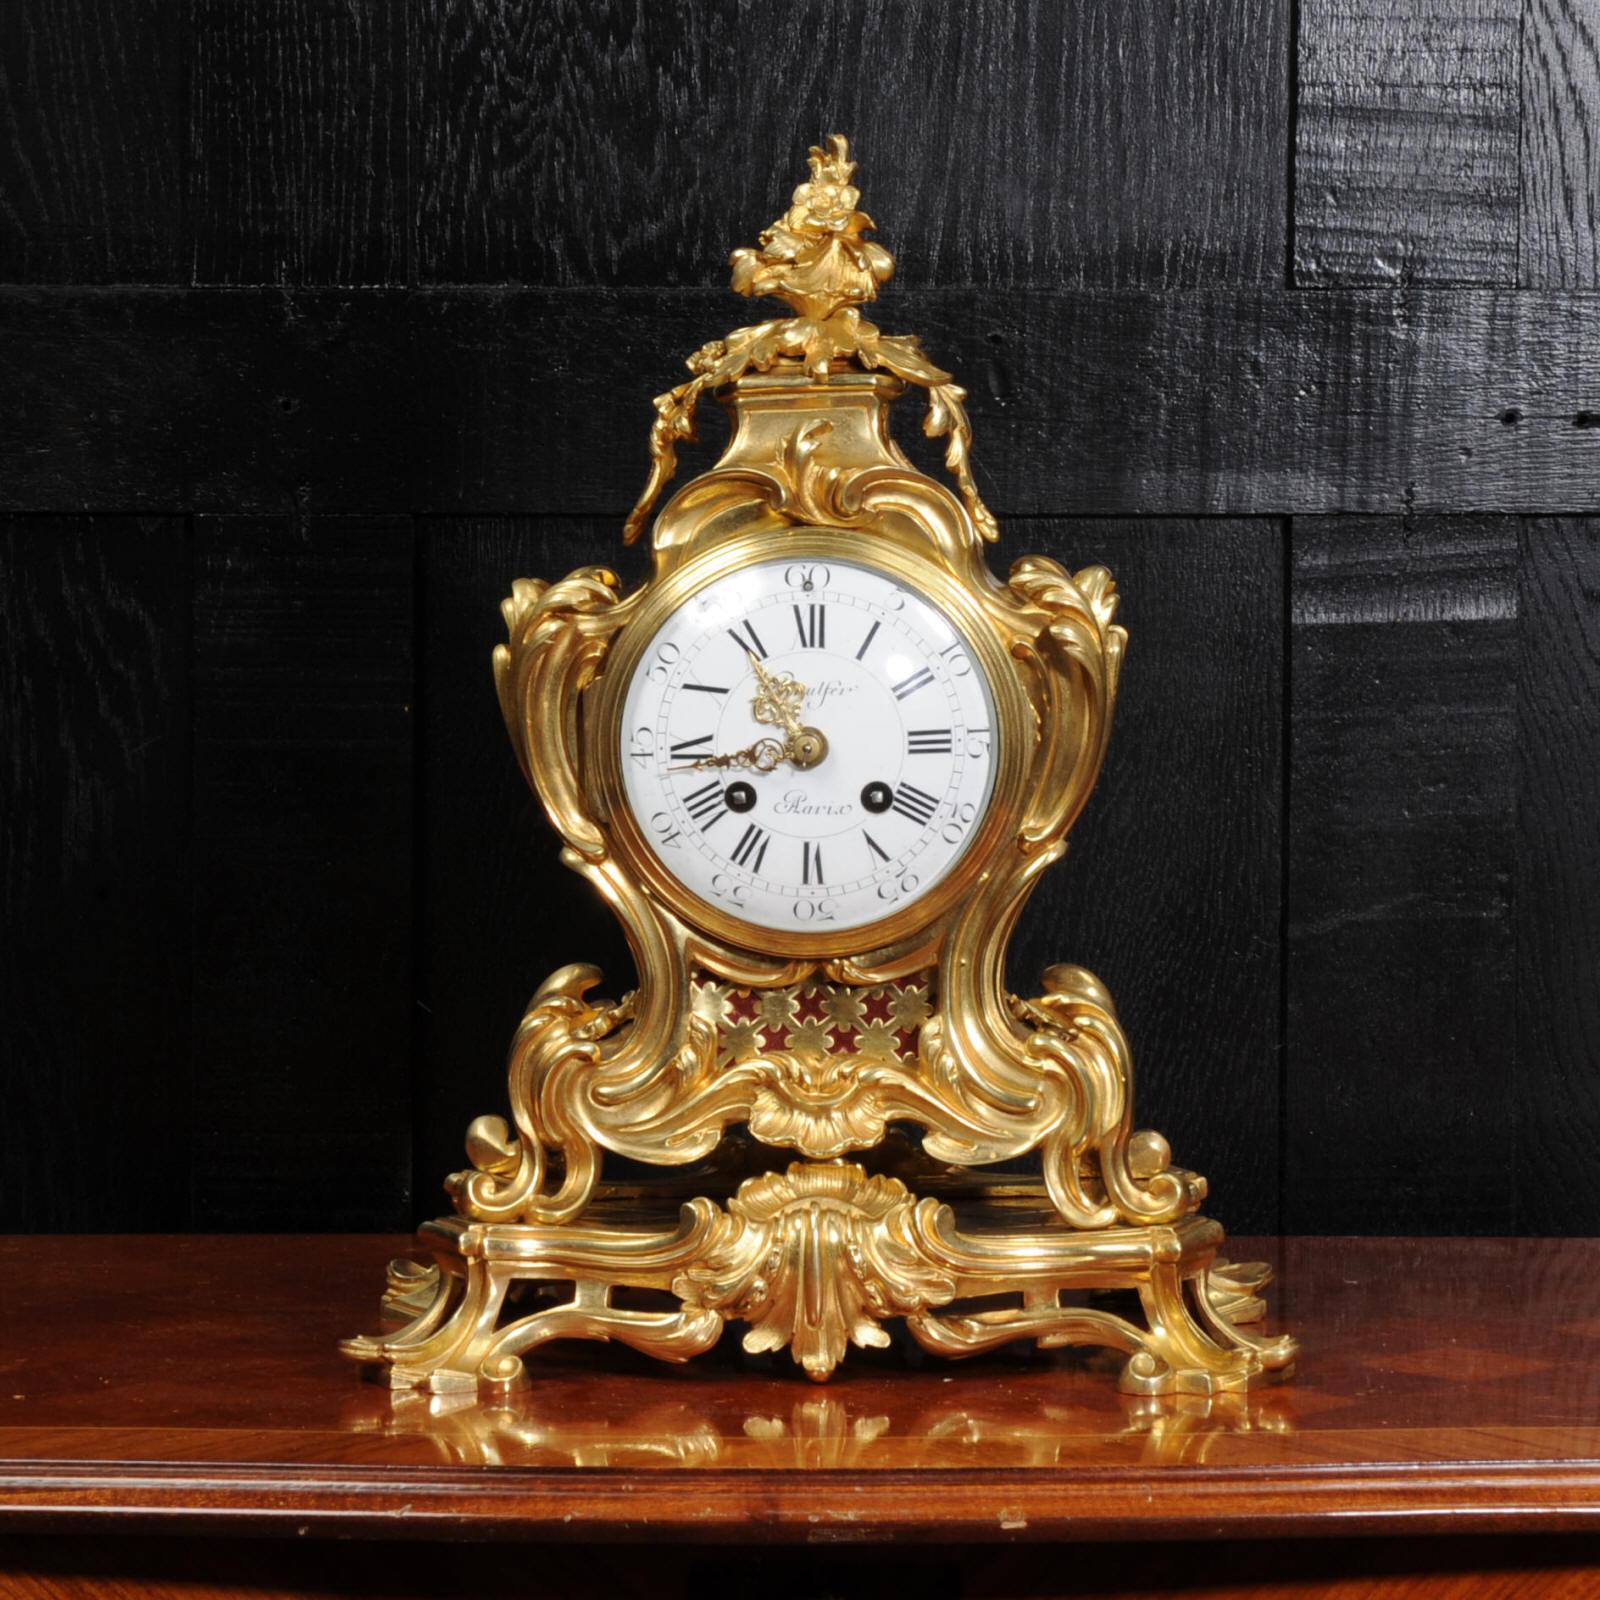 A stunning original antique French Rococo clock, circa 1870. It is beautifully sculptured with finely finished scrolls, curves and acanthus leaves in finely gilded bronze. Panels backed with red fabric lighten the design and the rear door is glazed